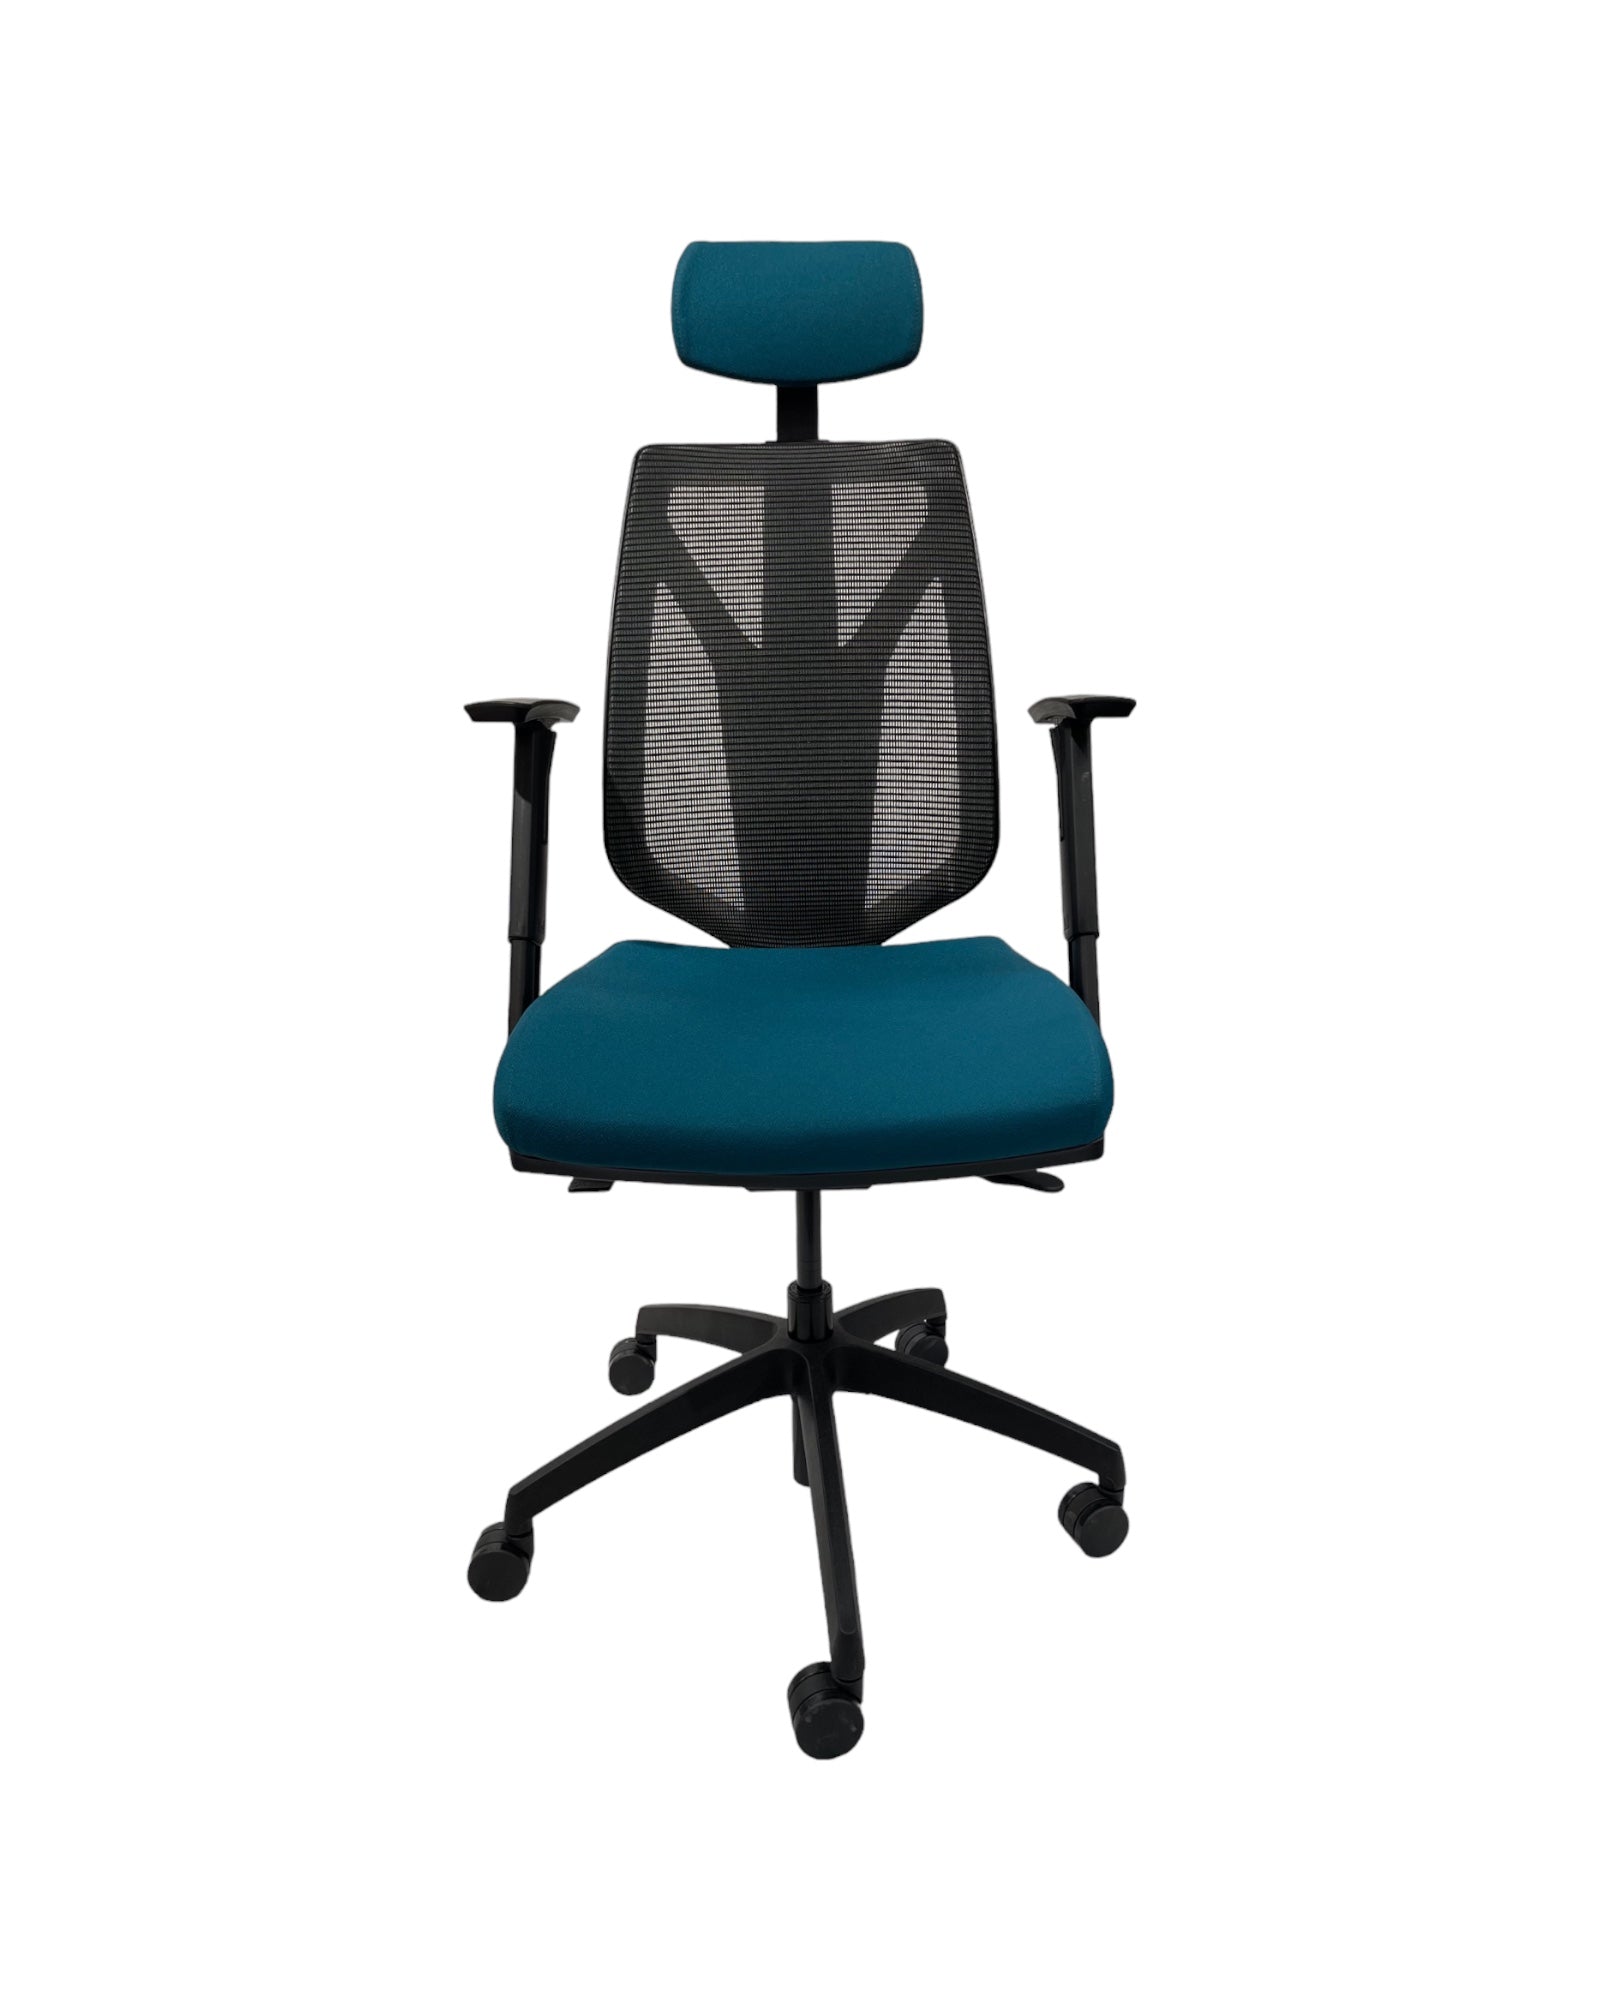 Mentor 1 mesh back chair with head rest